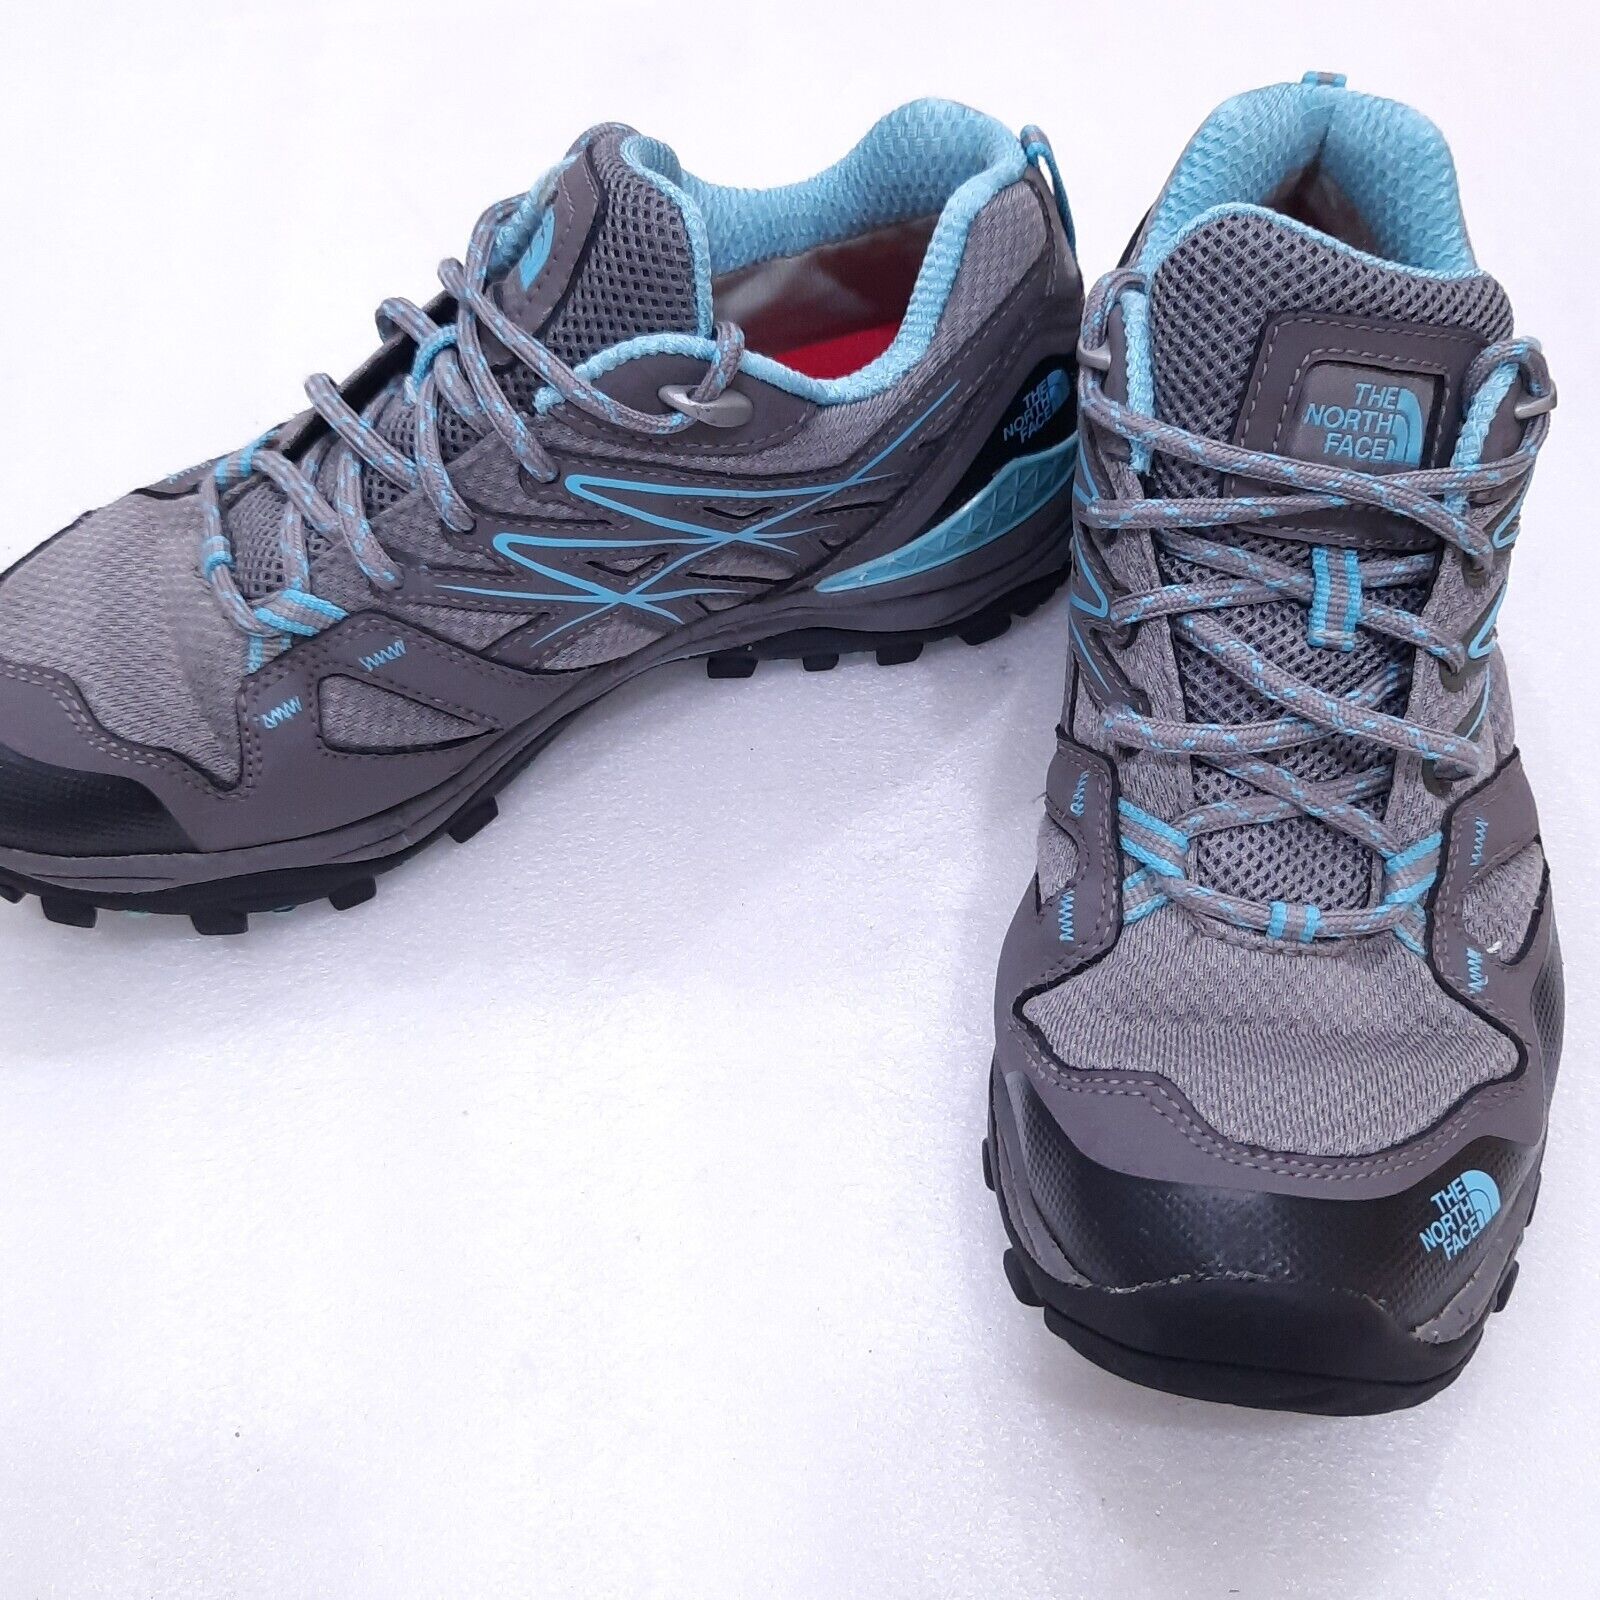 The North Face Hedgehog Fastpack GTX Low Women&#039;s Hiking Size 9 eBay